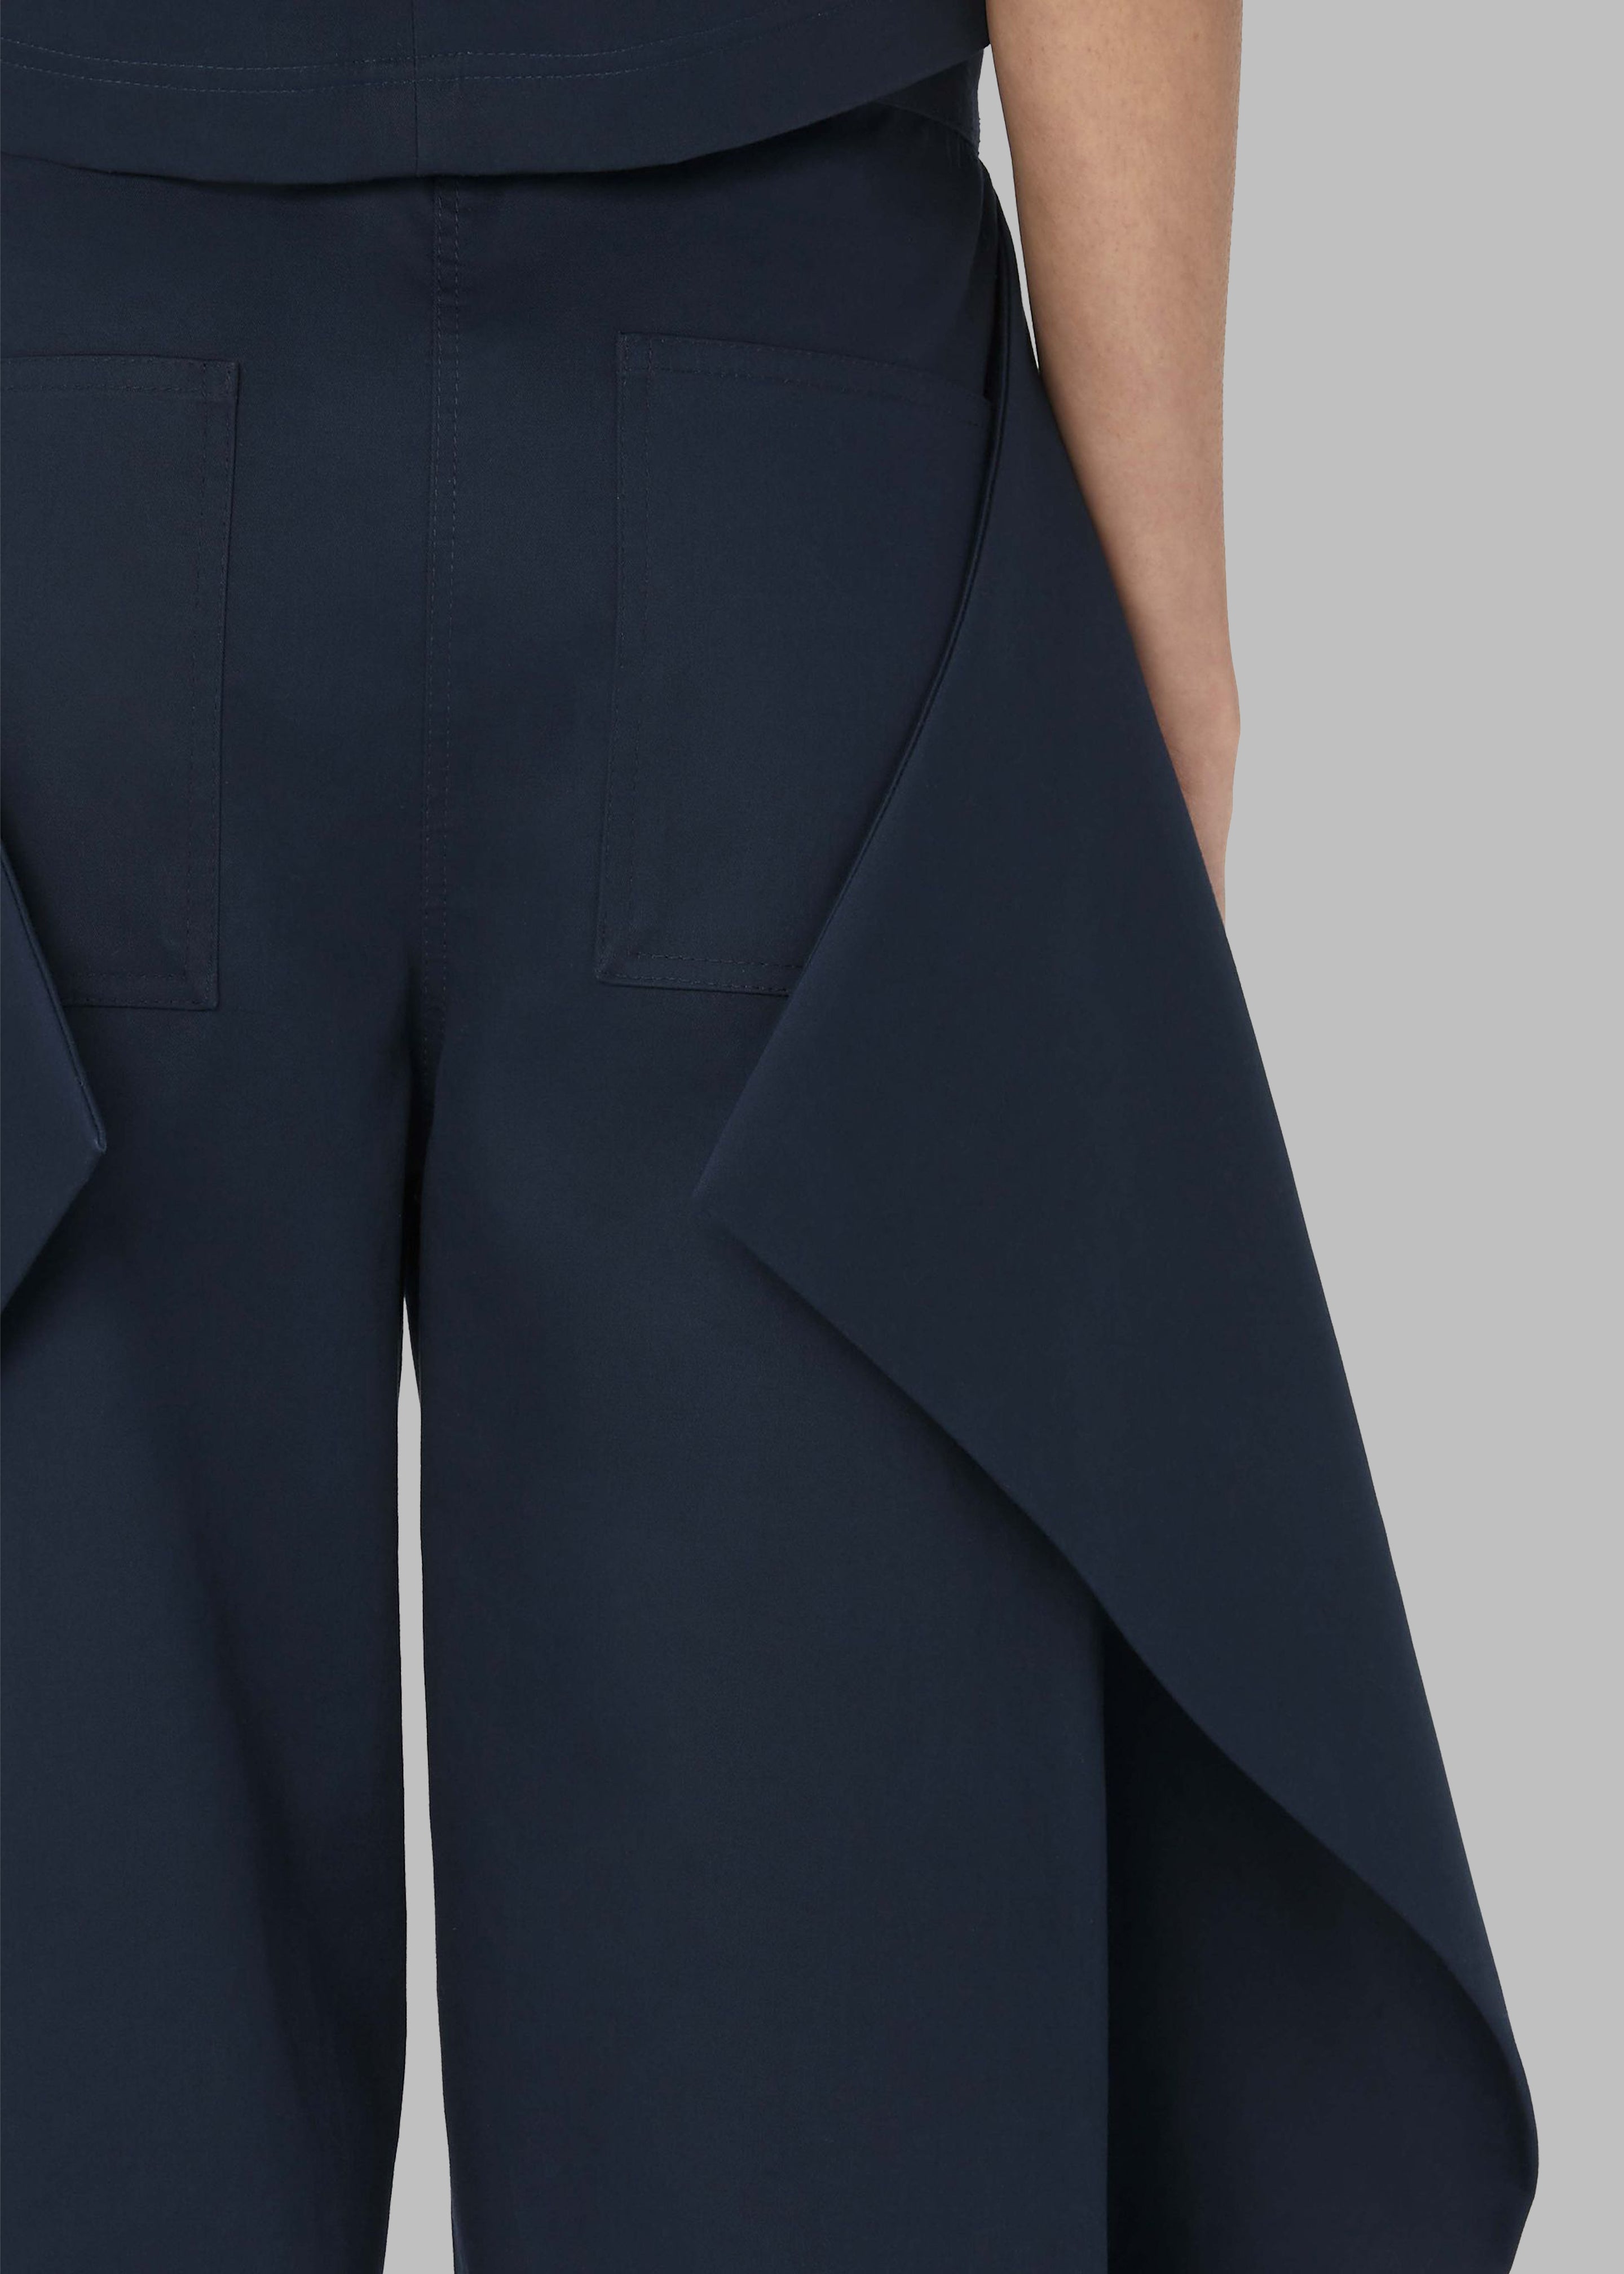 JW Anderson Kite Trousers - Navy - 7